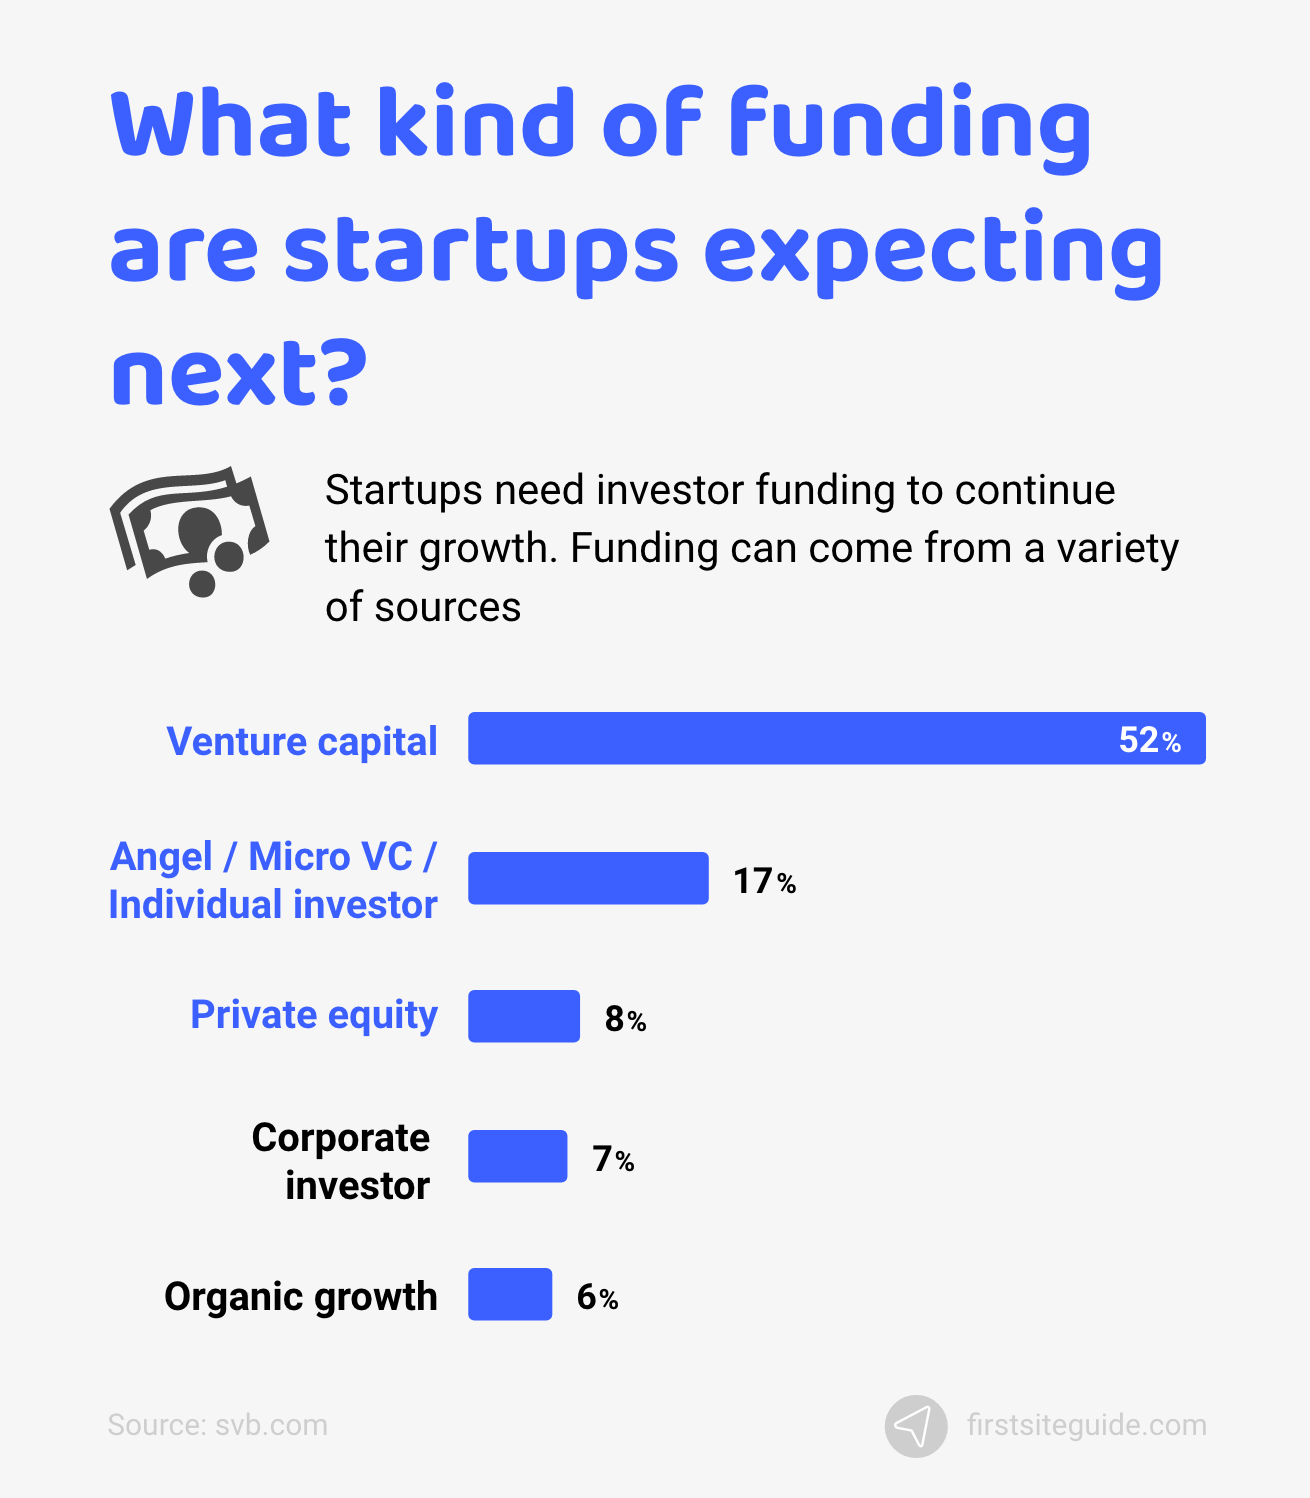 What kind of funding are startups expecting next